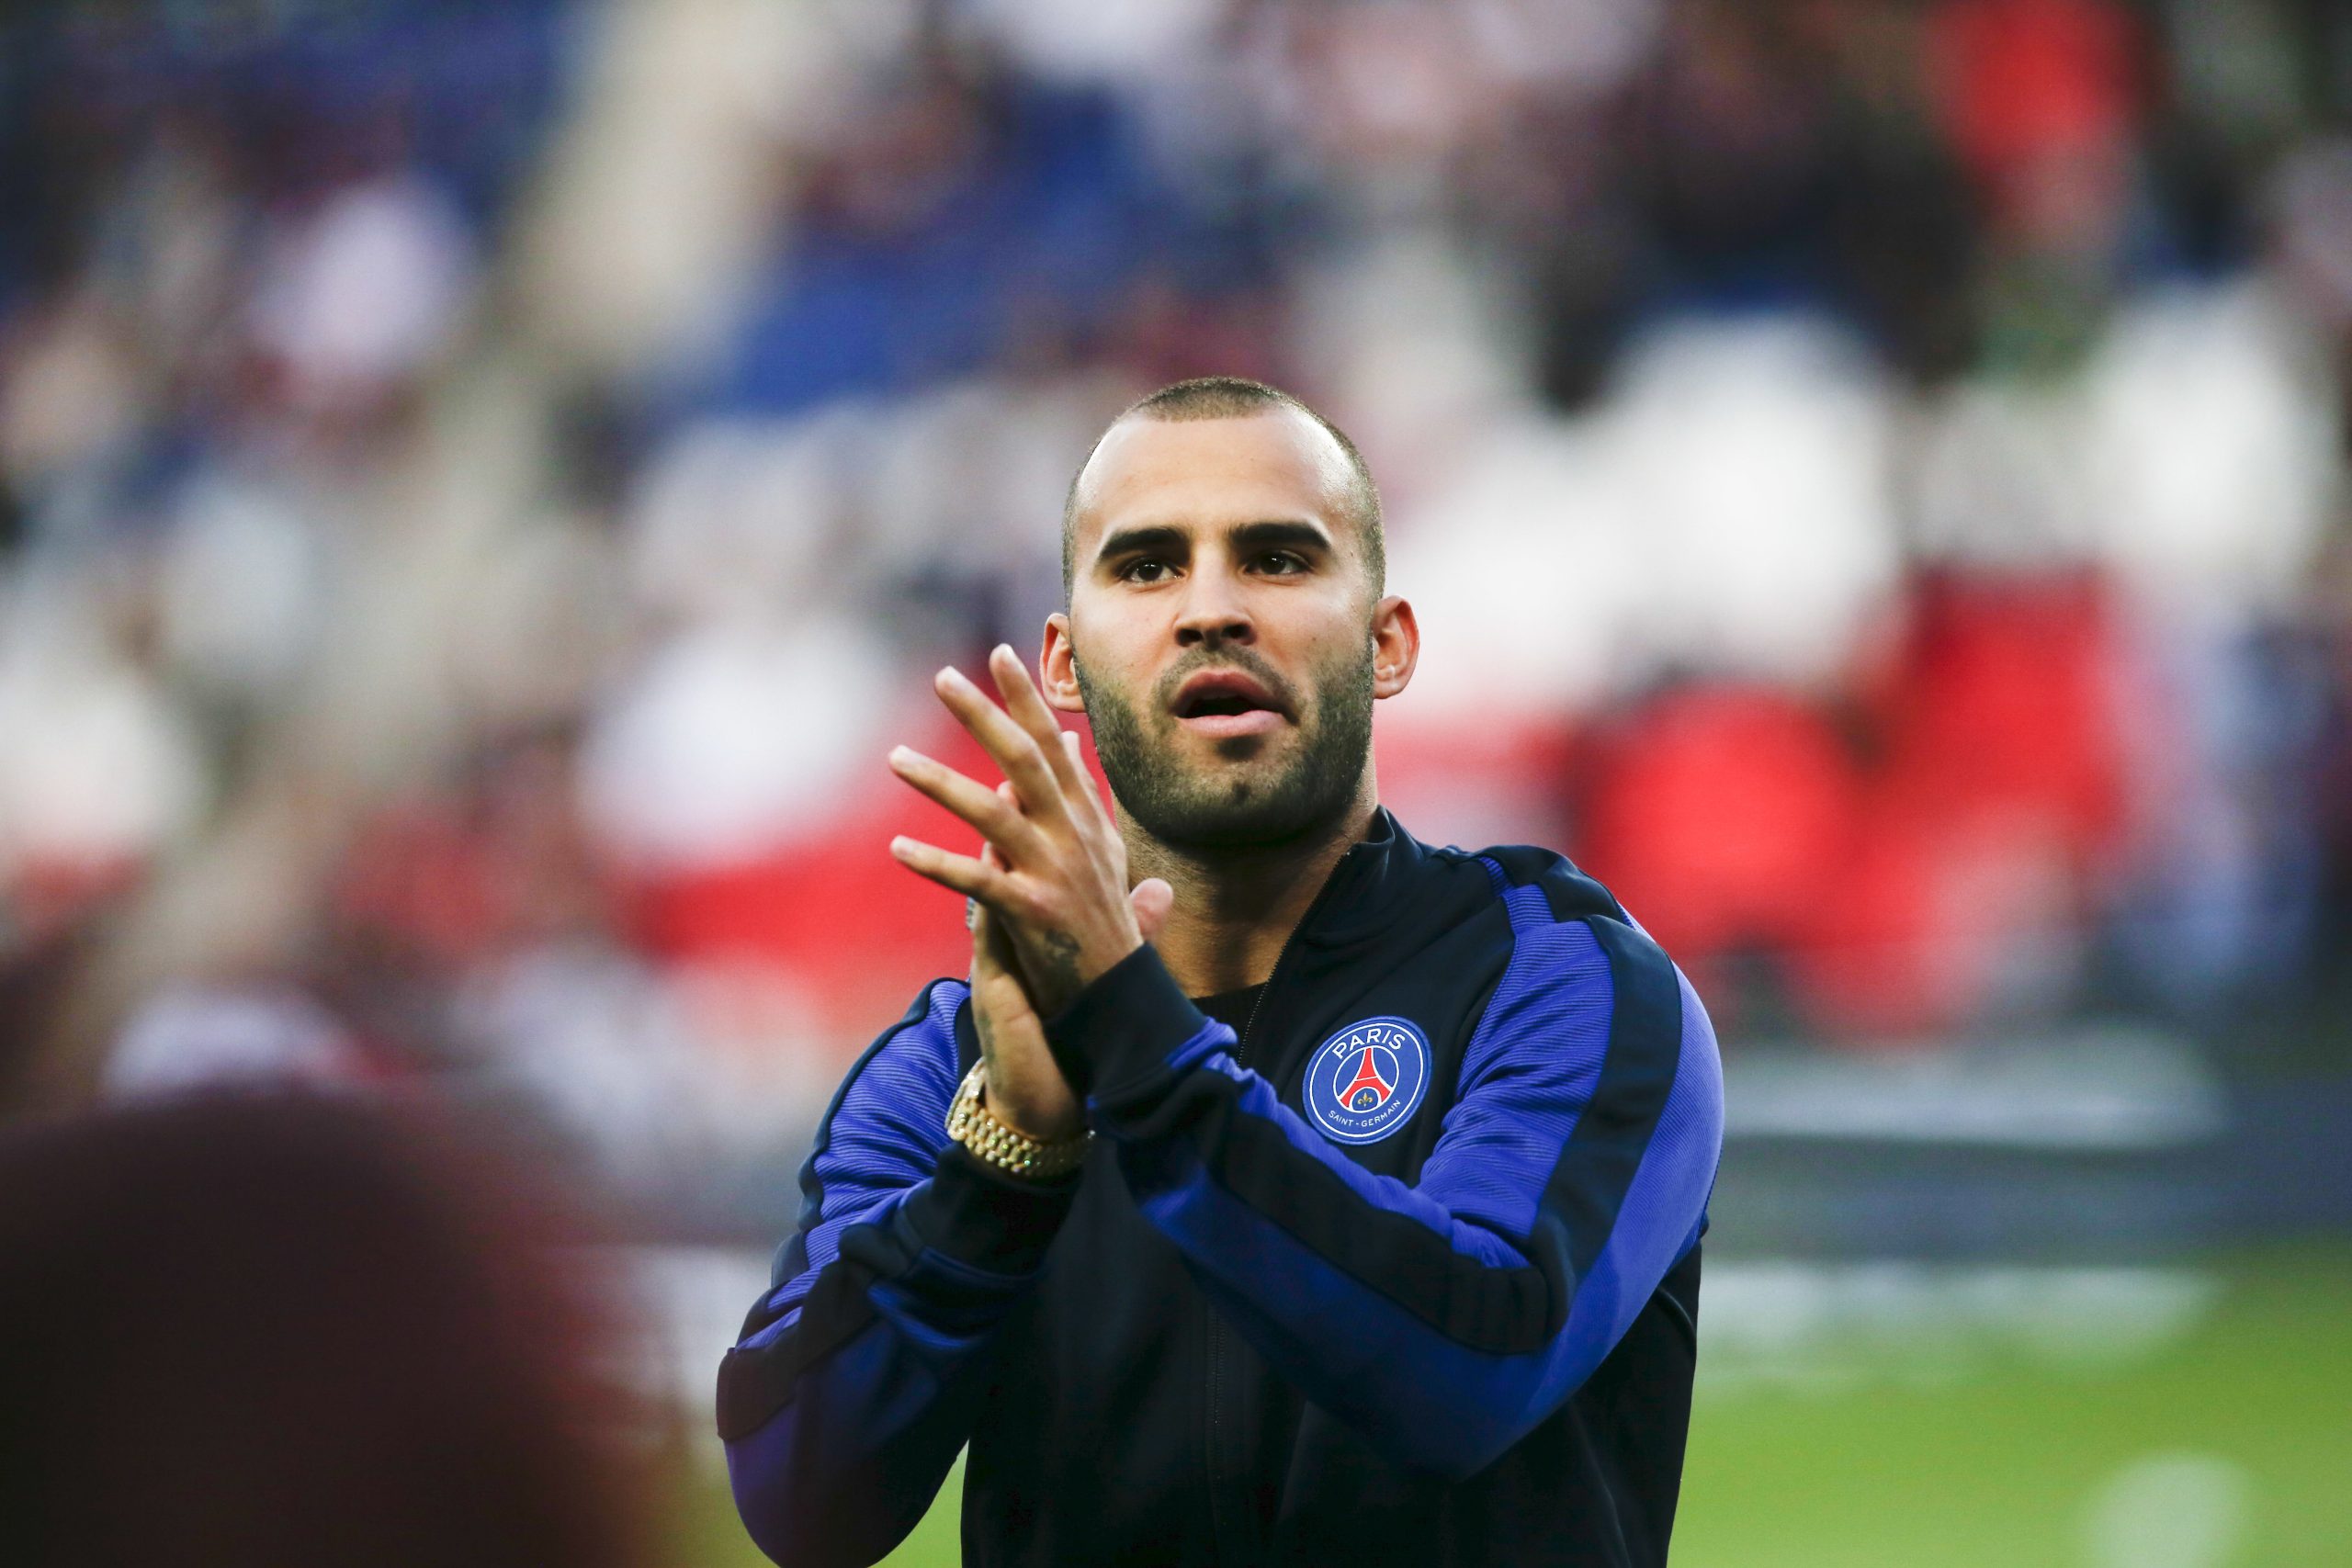 FILE - In this Aug.21, 2016 file photo, PSG's Jese Rodriguez reacts before the French League One soccer match between PSG and Metz at the Parc des Princes stadium in Paris. Paris Saint-Germain says Wednesday Aug. 16, 2017 it is loaning Spanish forward Jese Rodriguez to Stoke City for this season, without the option to buy him. (AP Photo/Kamil Zihnioglu, File)